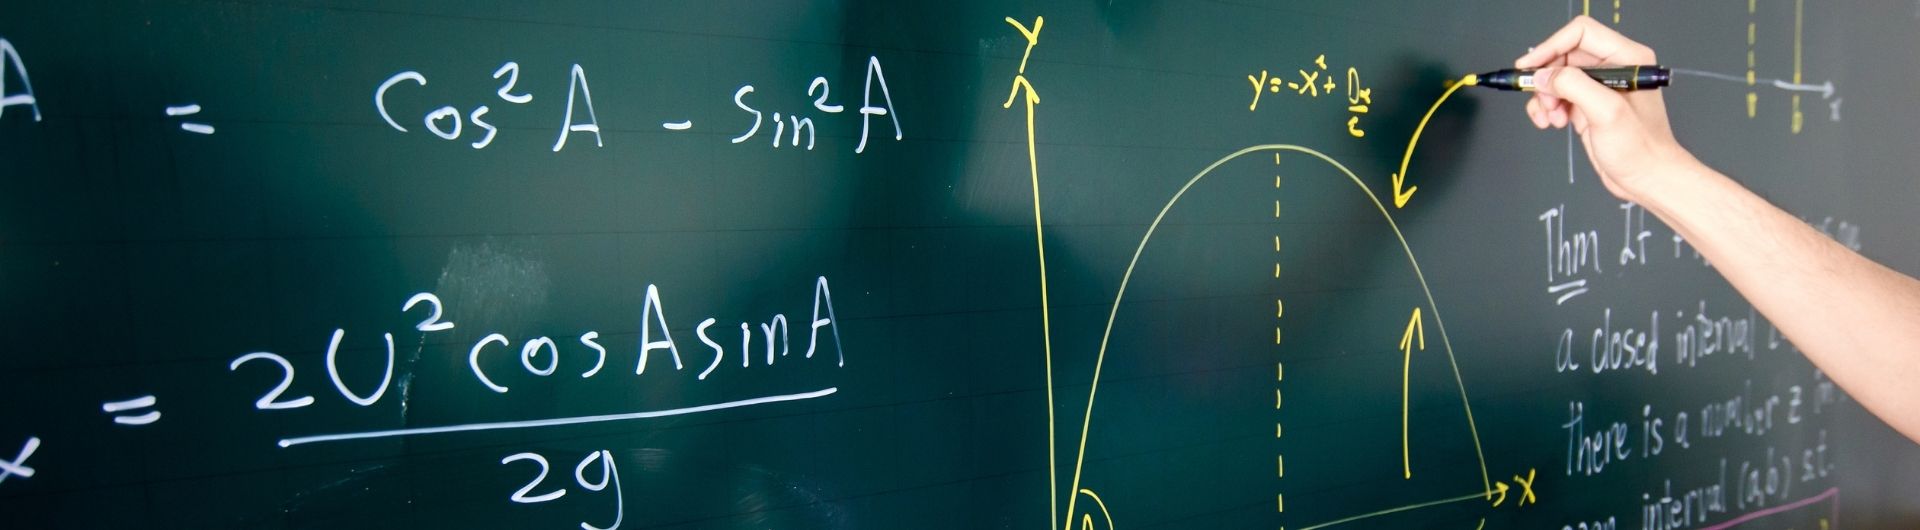 green chalkboard with math equations